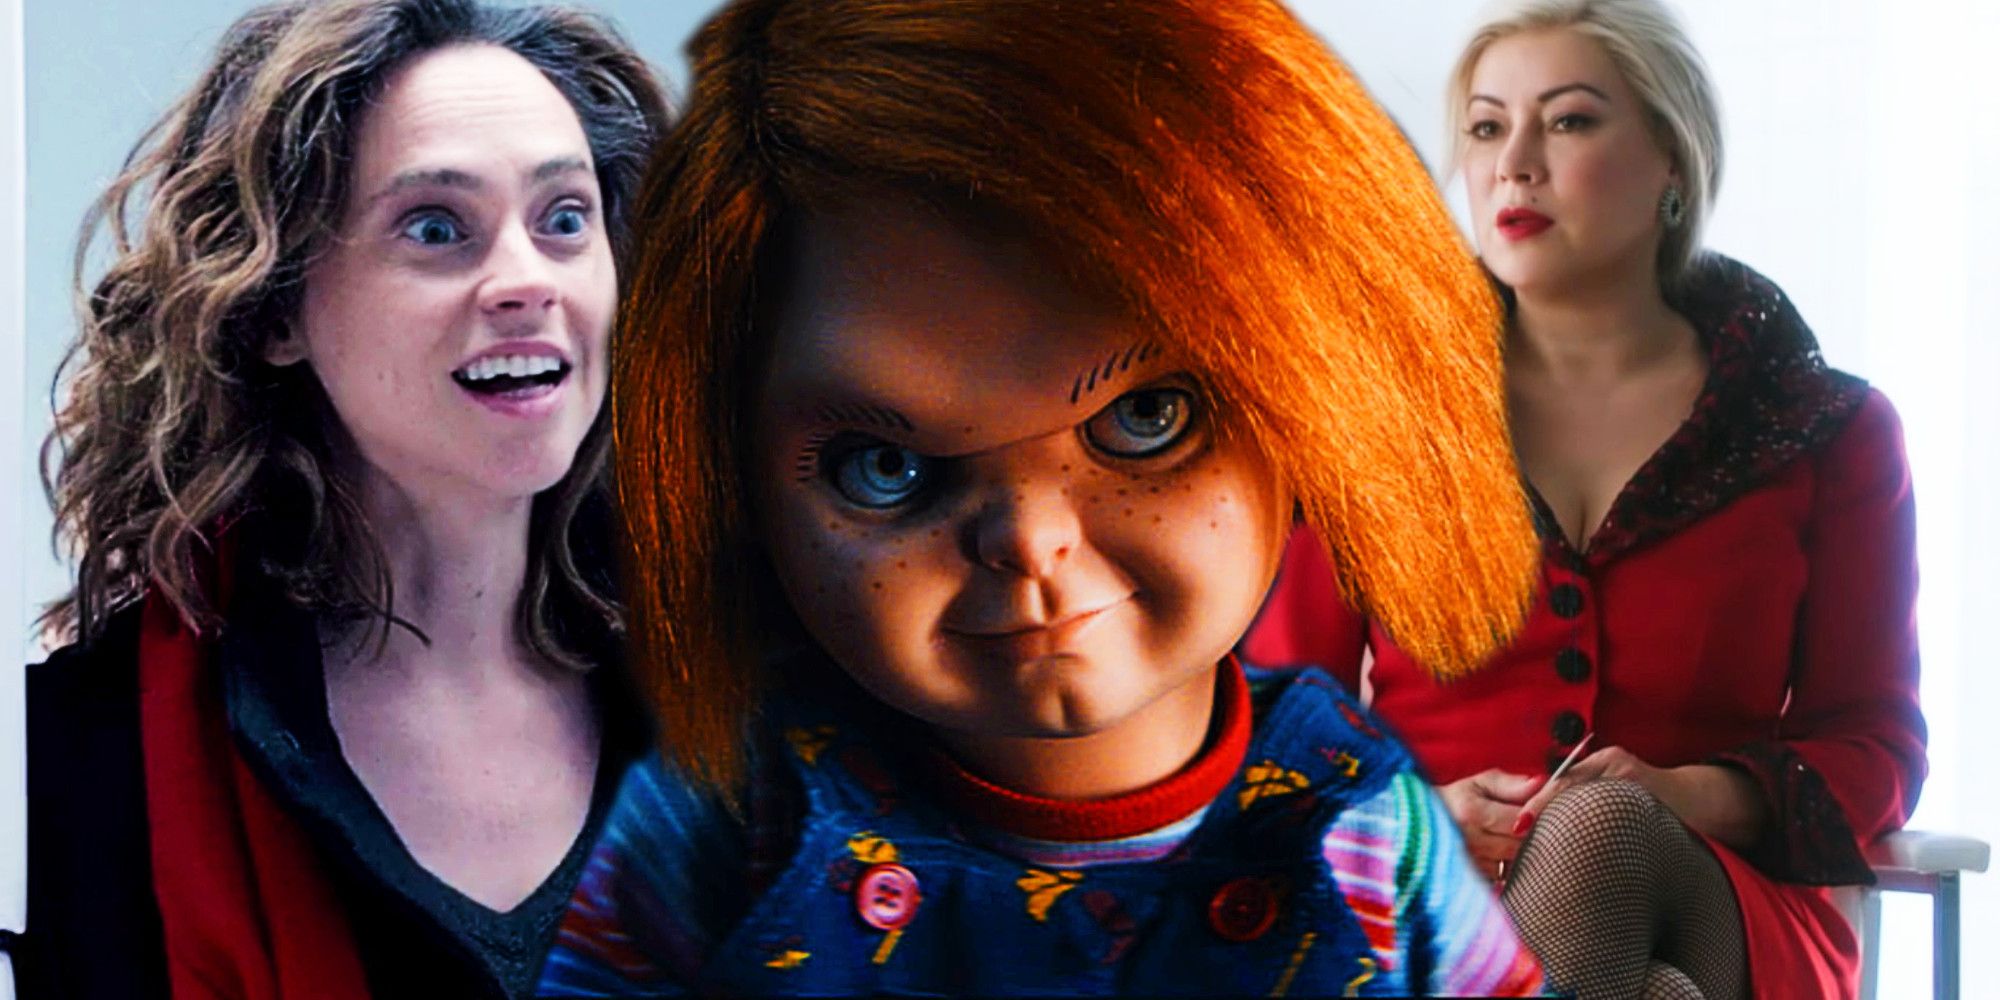 Brad Dourif As Charles Lee Ray In Chucky Fiona Dourif As Nica Pierce And Jennifer Tilly As Tiffany Valentine In Cult Of Chucky 